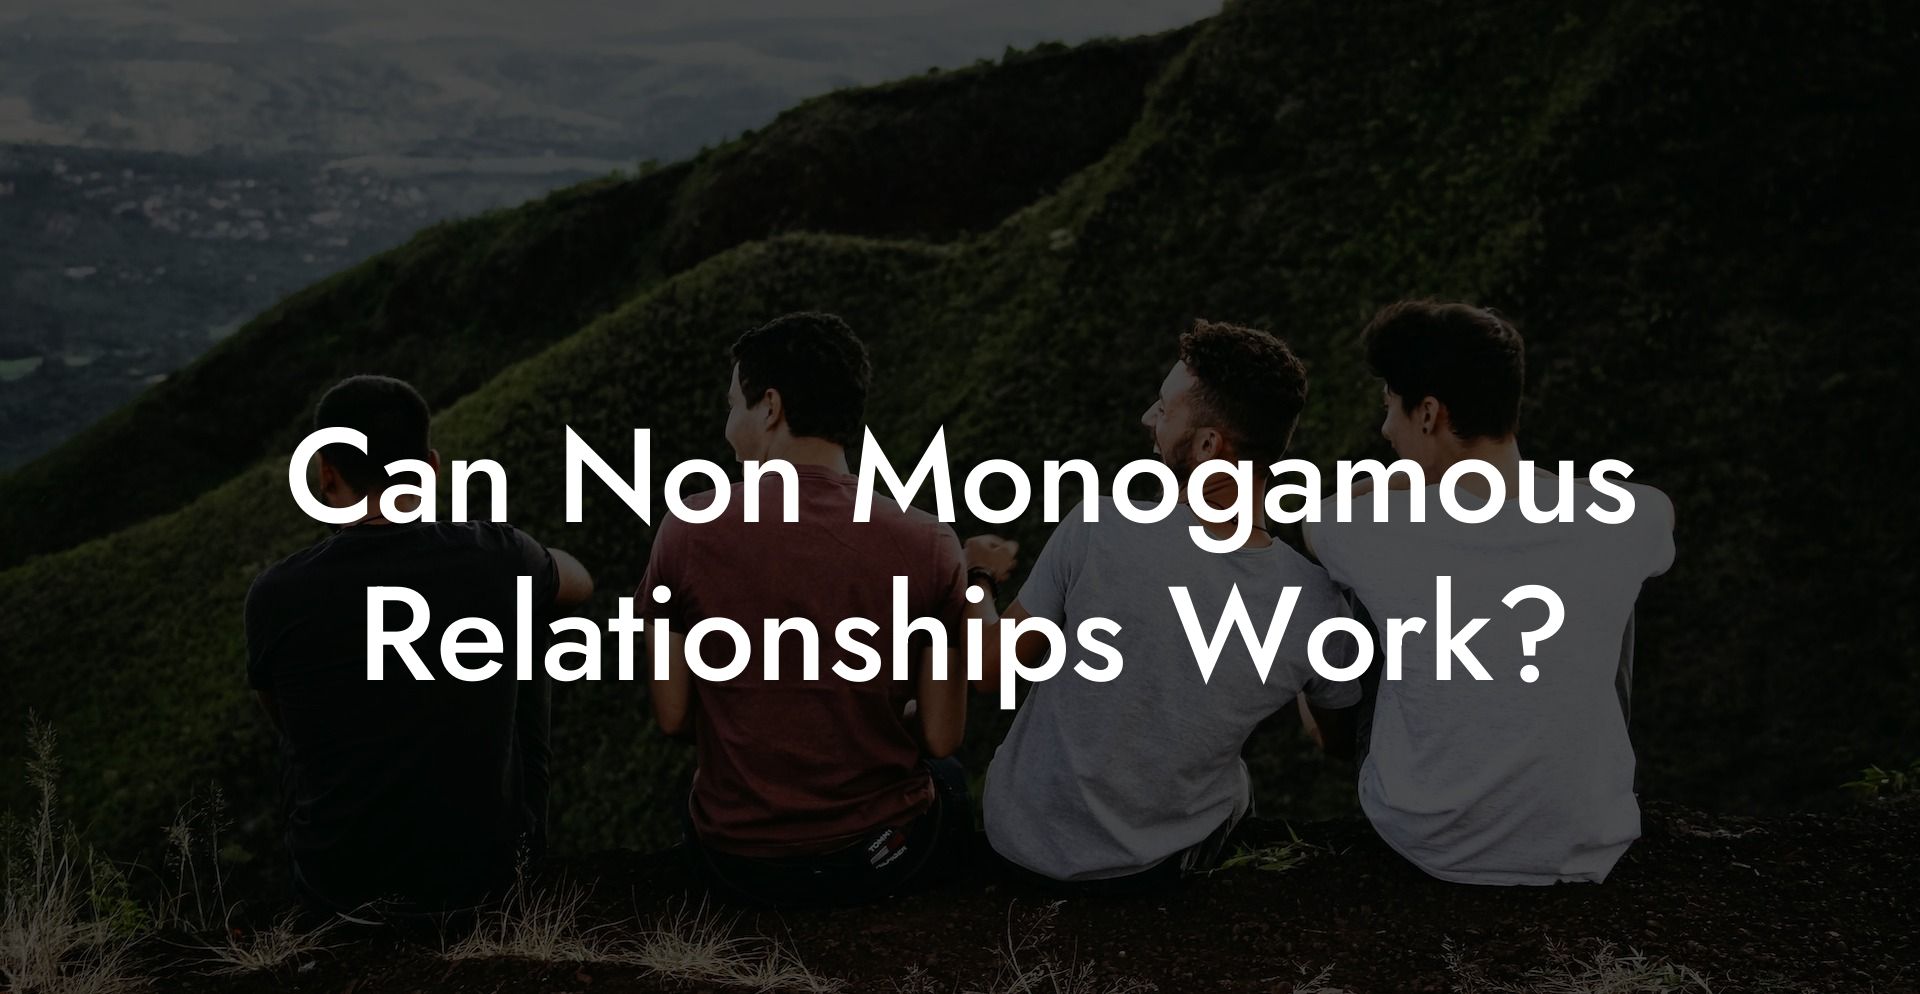 Can Non Monogamous Relationships Work?